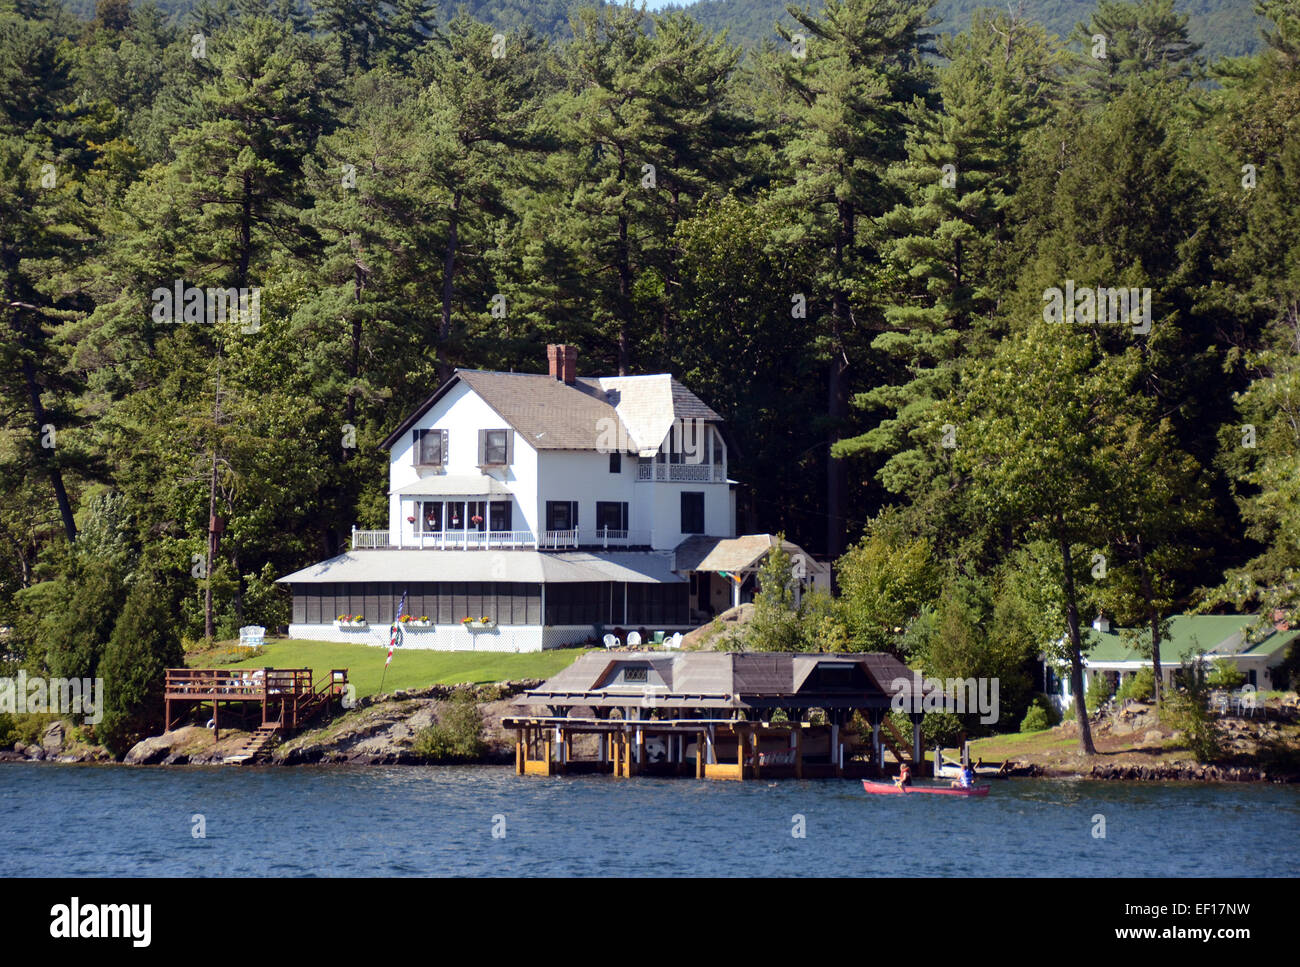 Luxury lakefront home near Lake George, New York State Stock Photo